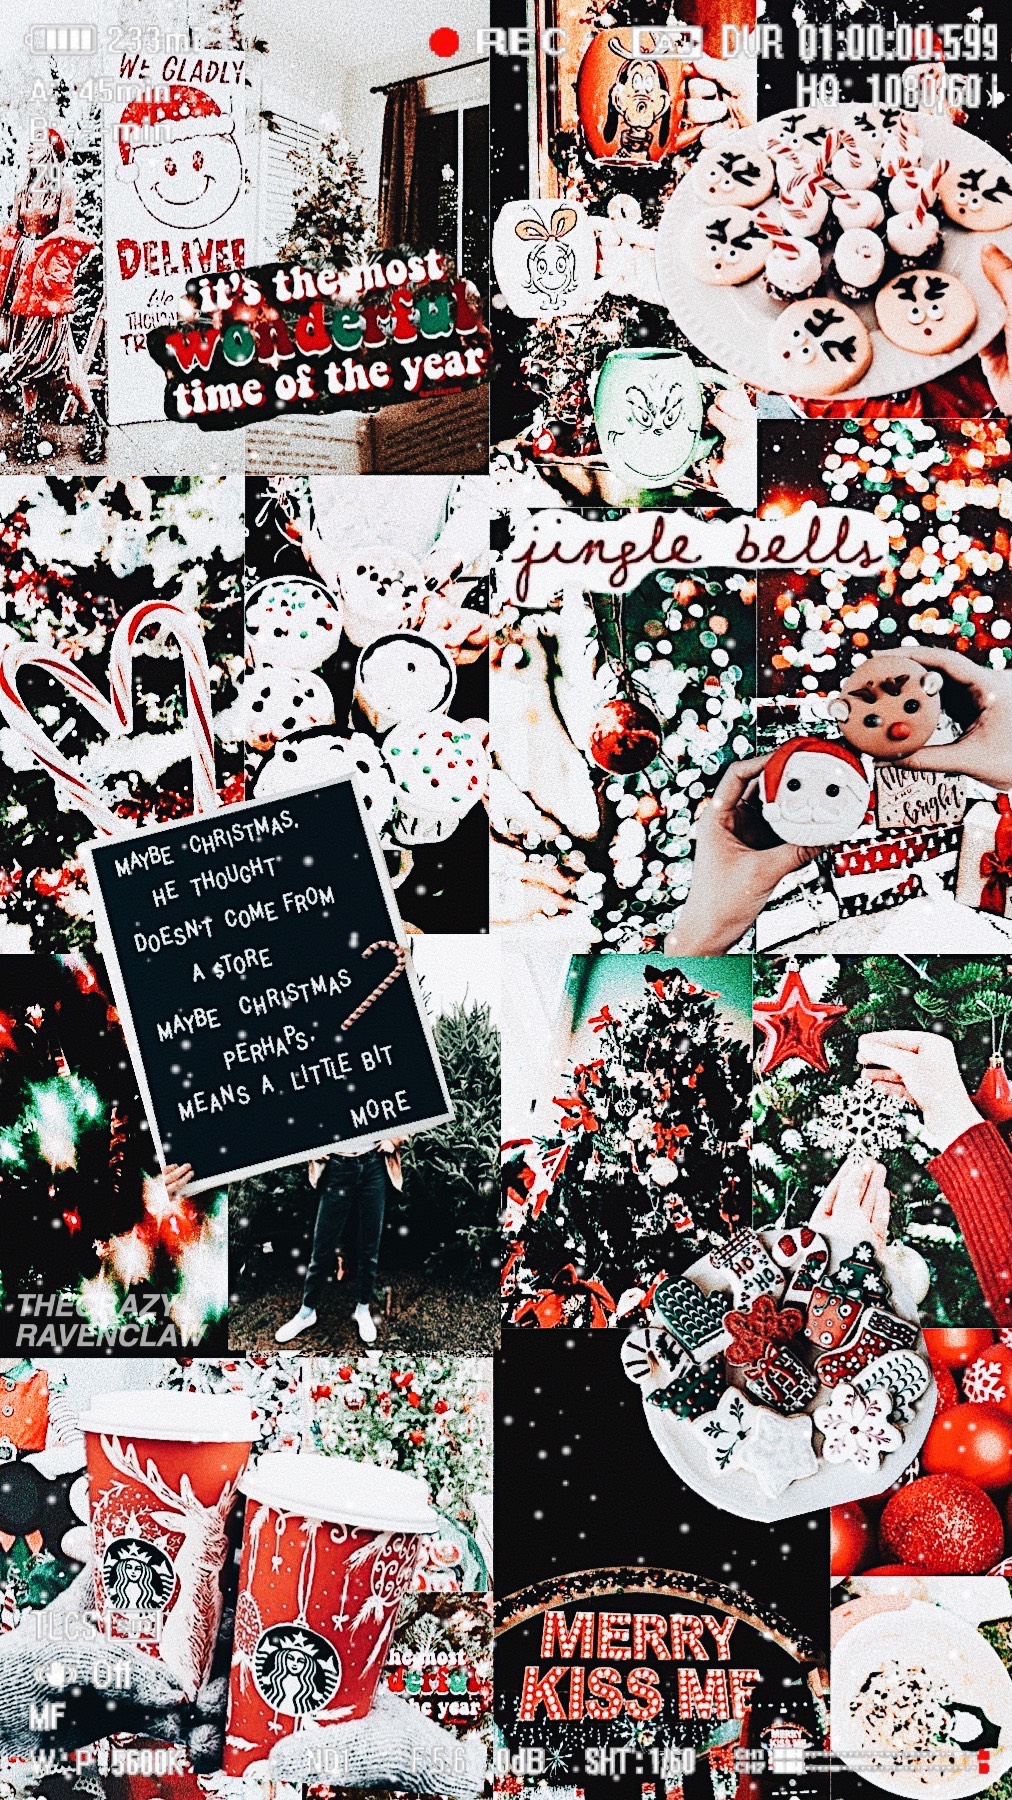 aaaAHHHHHH ITS CHRISTMAS GUYS MERRY CHRISTMAS WHAT EVEN HAPPENED TO 2019 THIS IS INSANE WHAT ILYASM AND I HOPE U HAVE THE BEST DAY EVER TODAY 🎄🌨🎅🏻☃️✨ CHECK COMMENTS